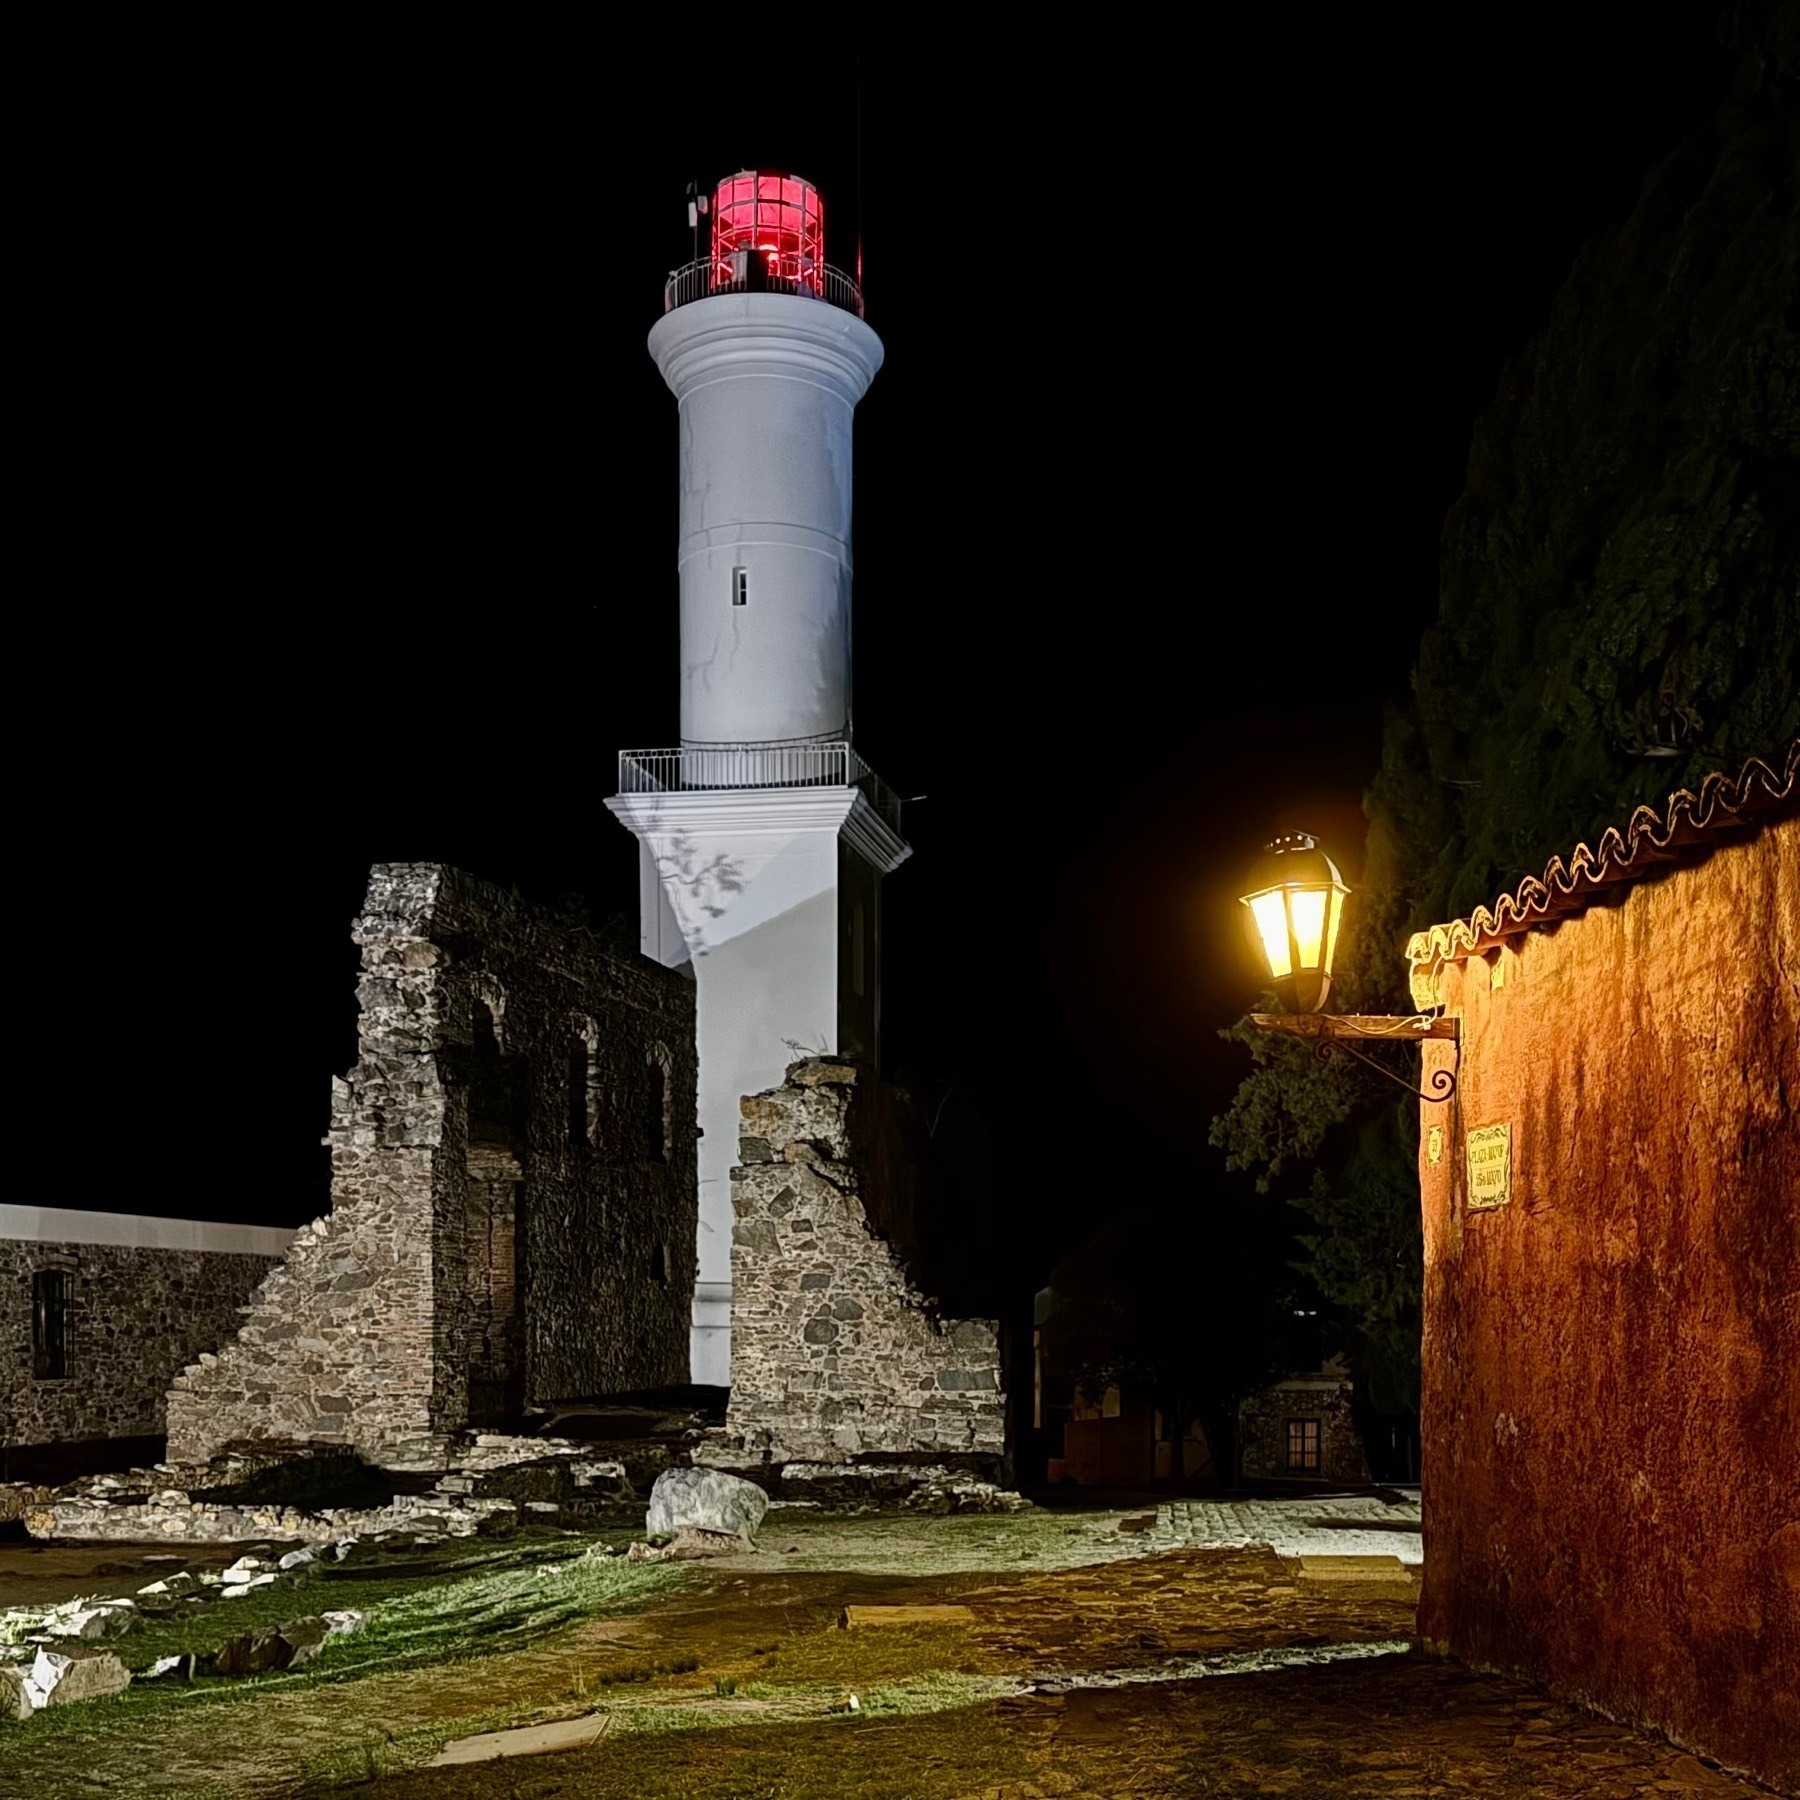 The Colonia del Sacramento Lighthouse with its red light shining, beside a renovated 18th-century Portuguese house, its lantern lit in yellow